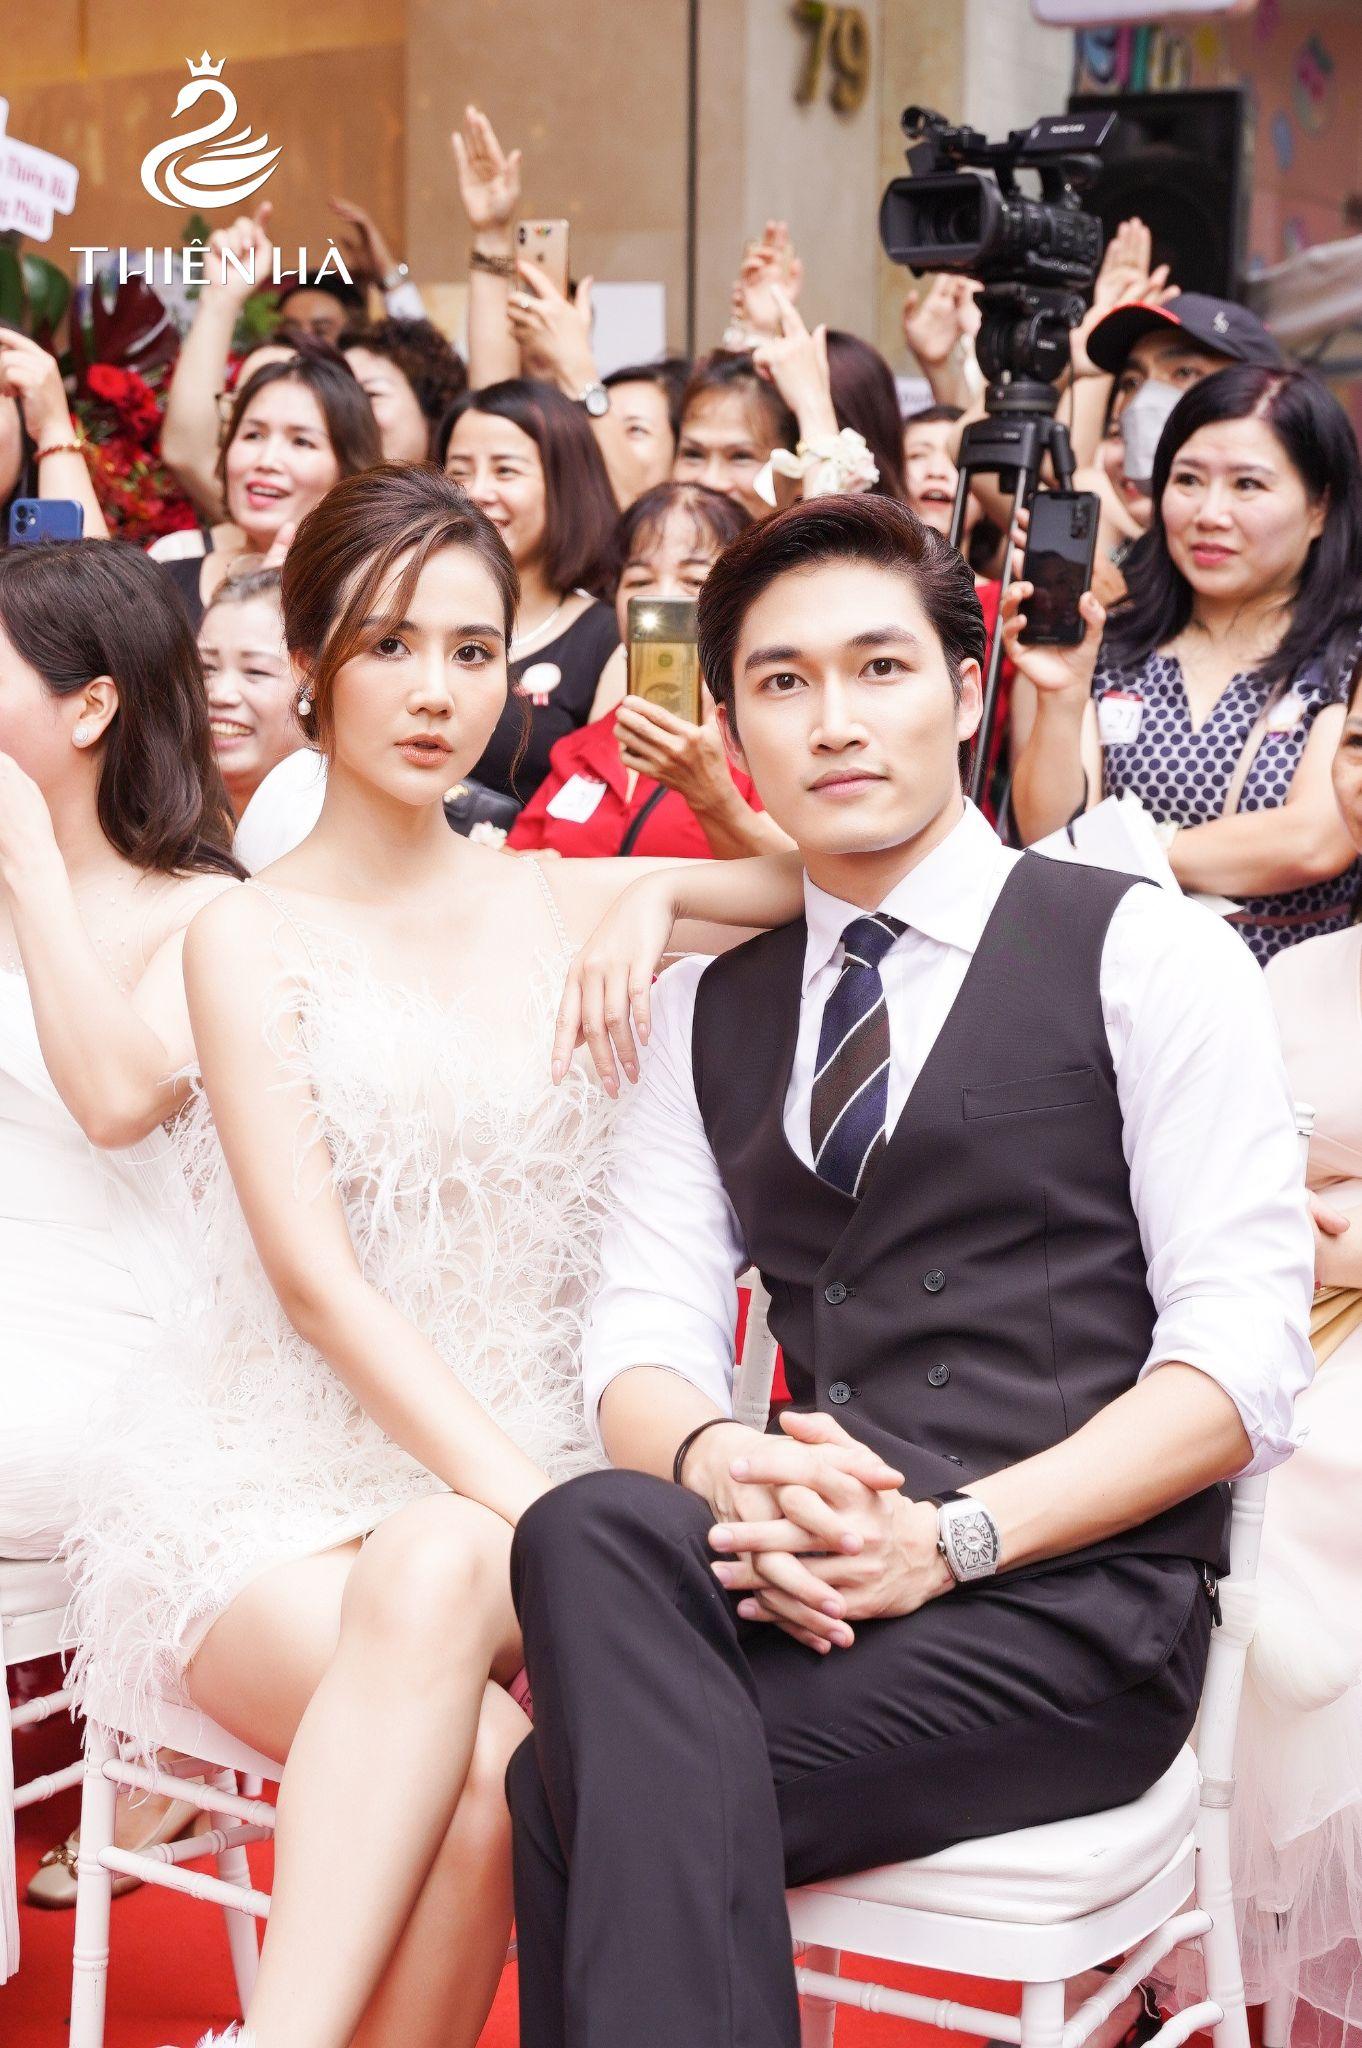 Hoang Duy and Van Trang love to attend the event together - Photo 5.